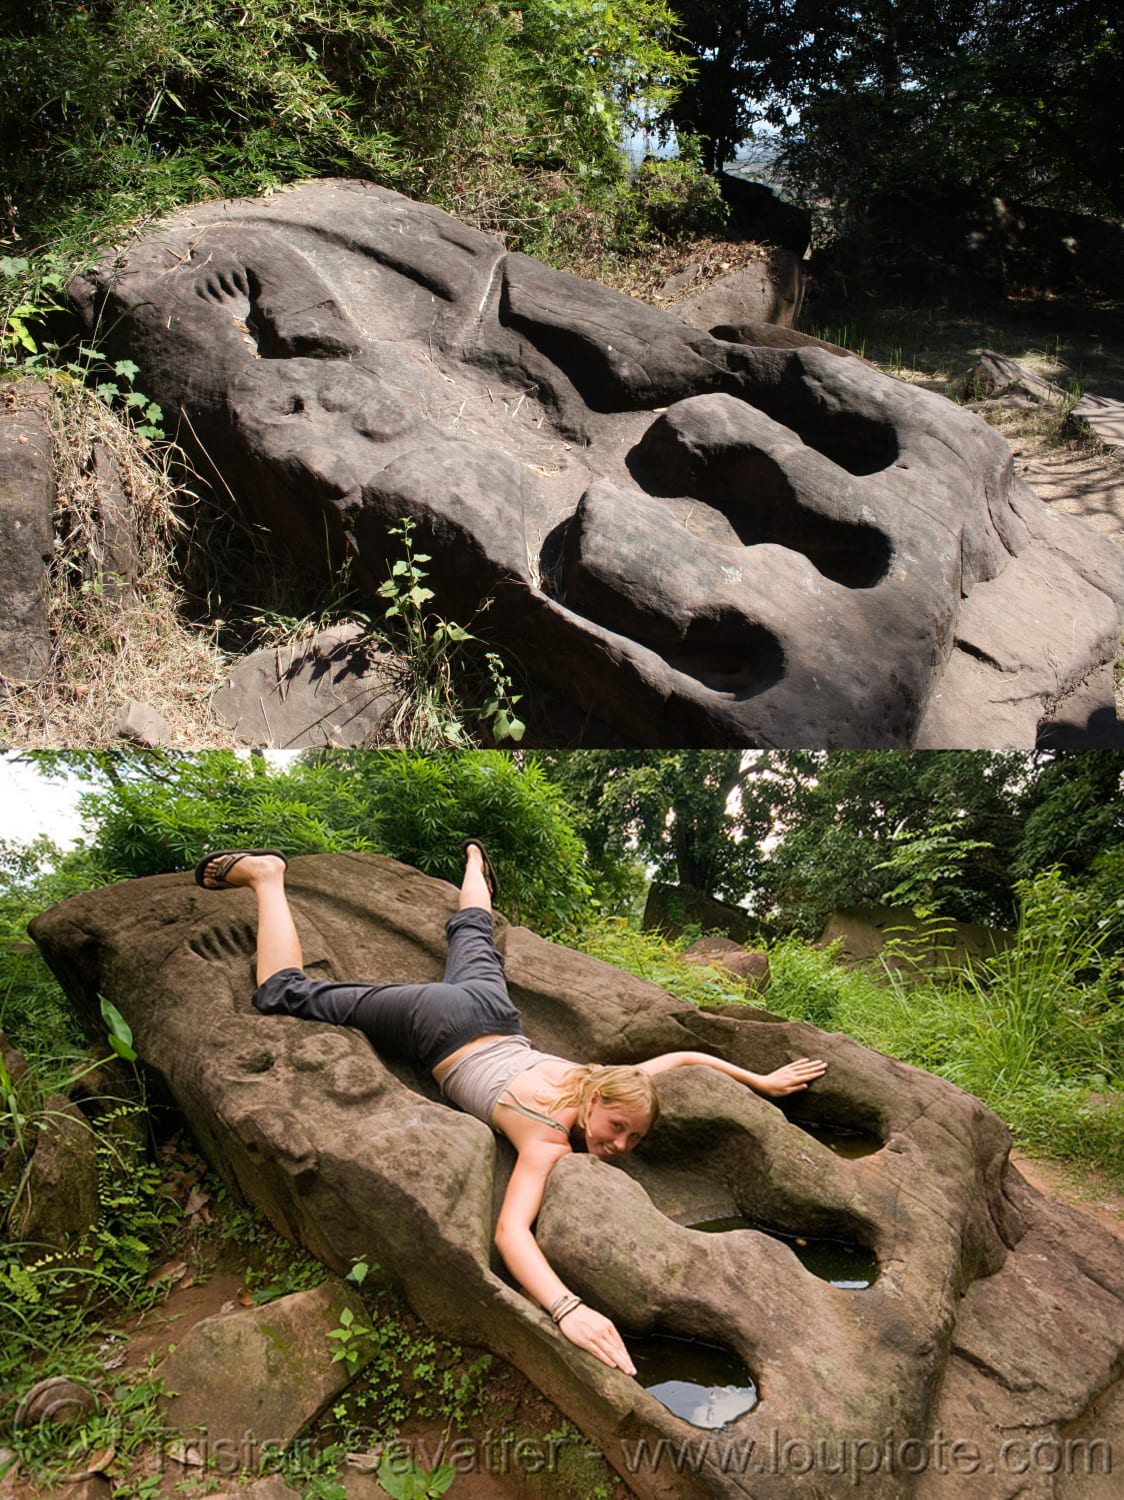 The Crocodile Stone is a peculiar rock, located in the Vat Phou Temple complex in Laos, that contains the carving of a crocodile. It was possibly the site of an annual human sacrifice in pre-Angkorian times (before the 9th century CE)